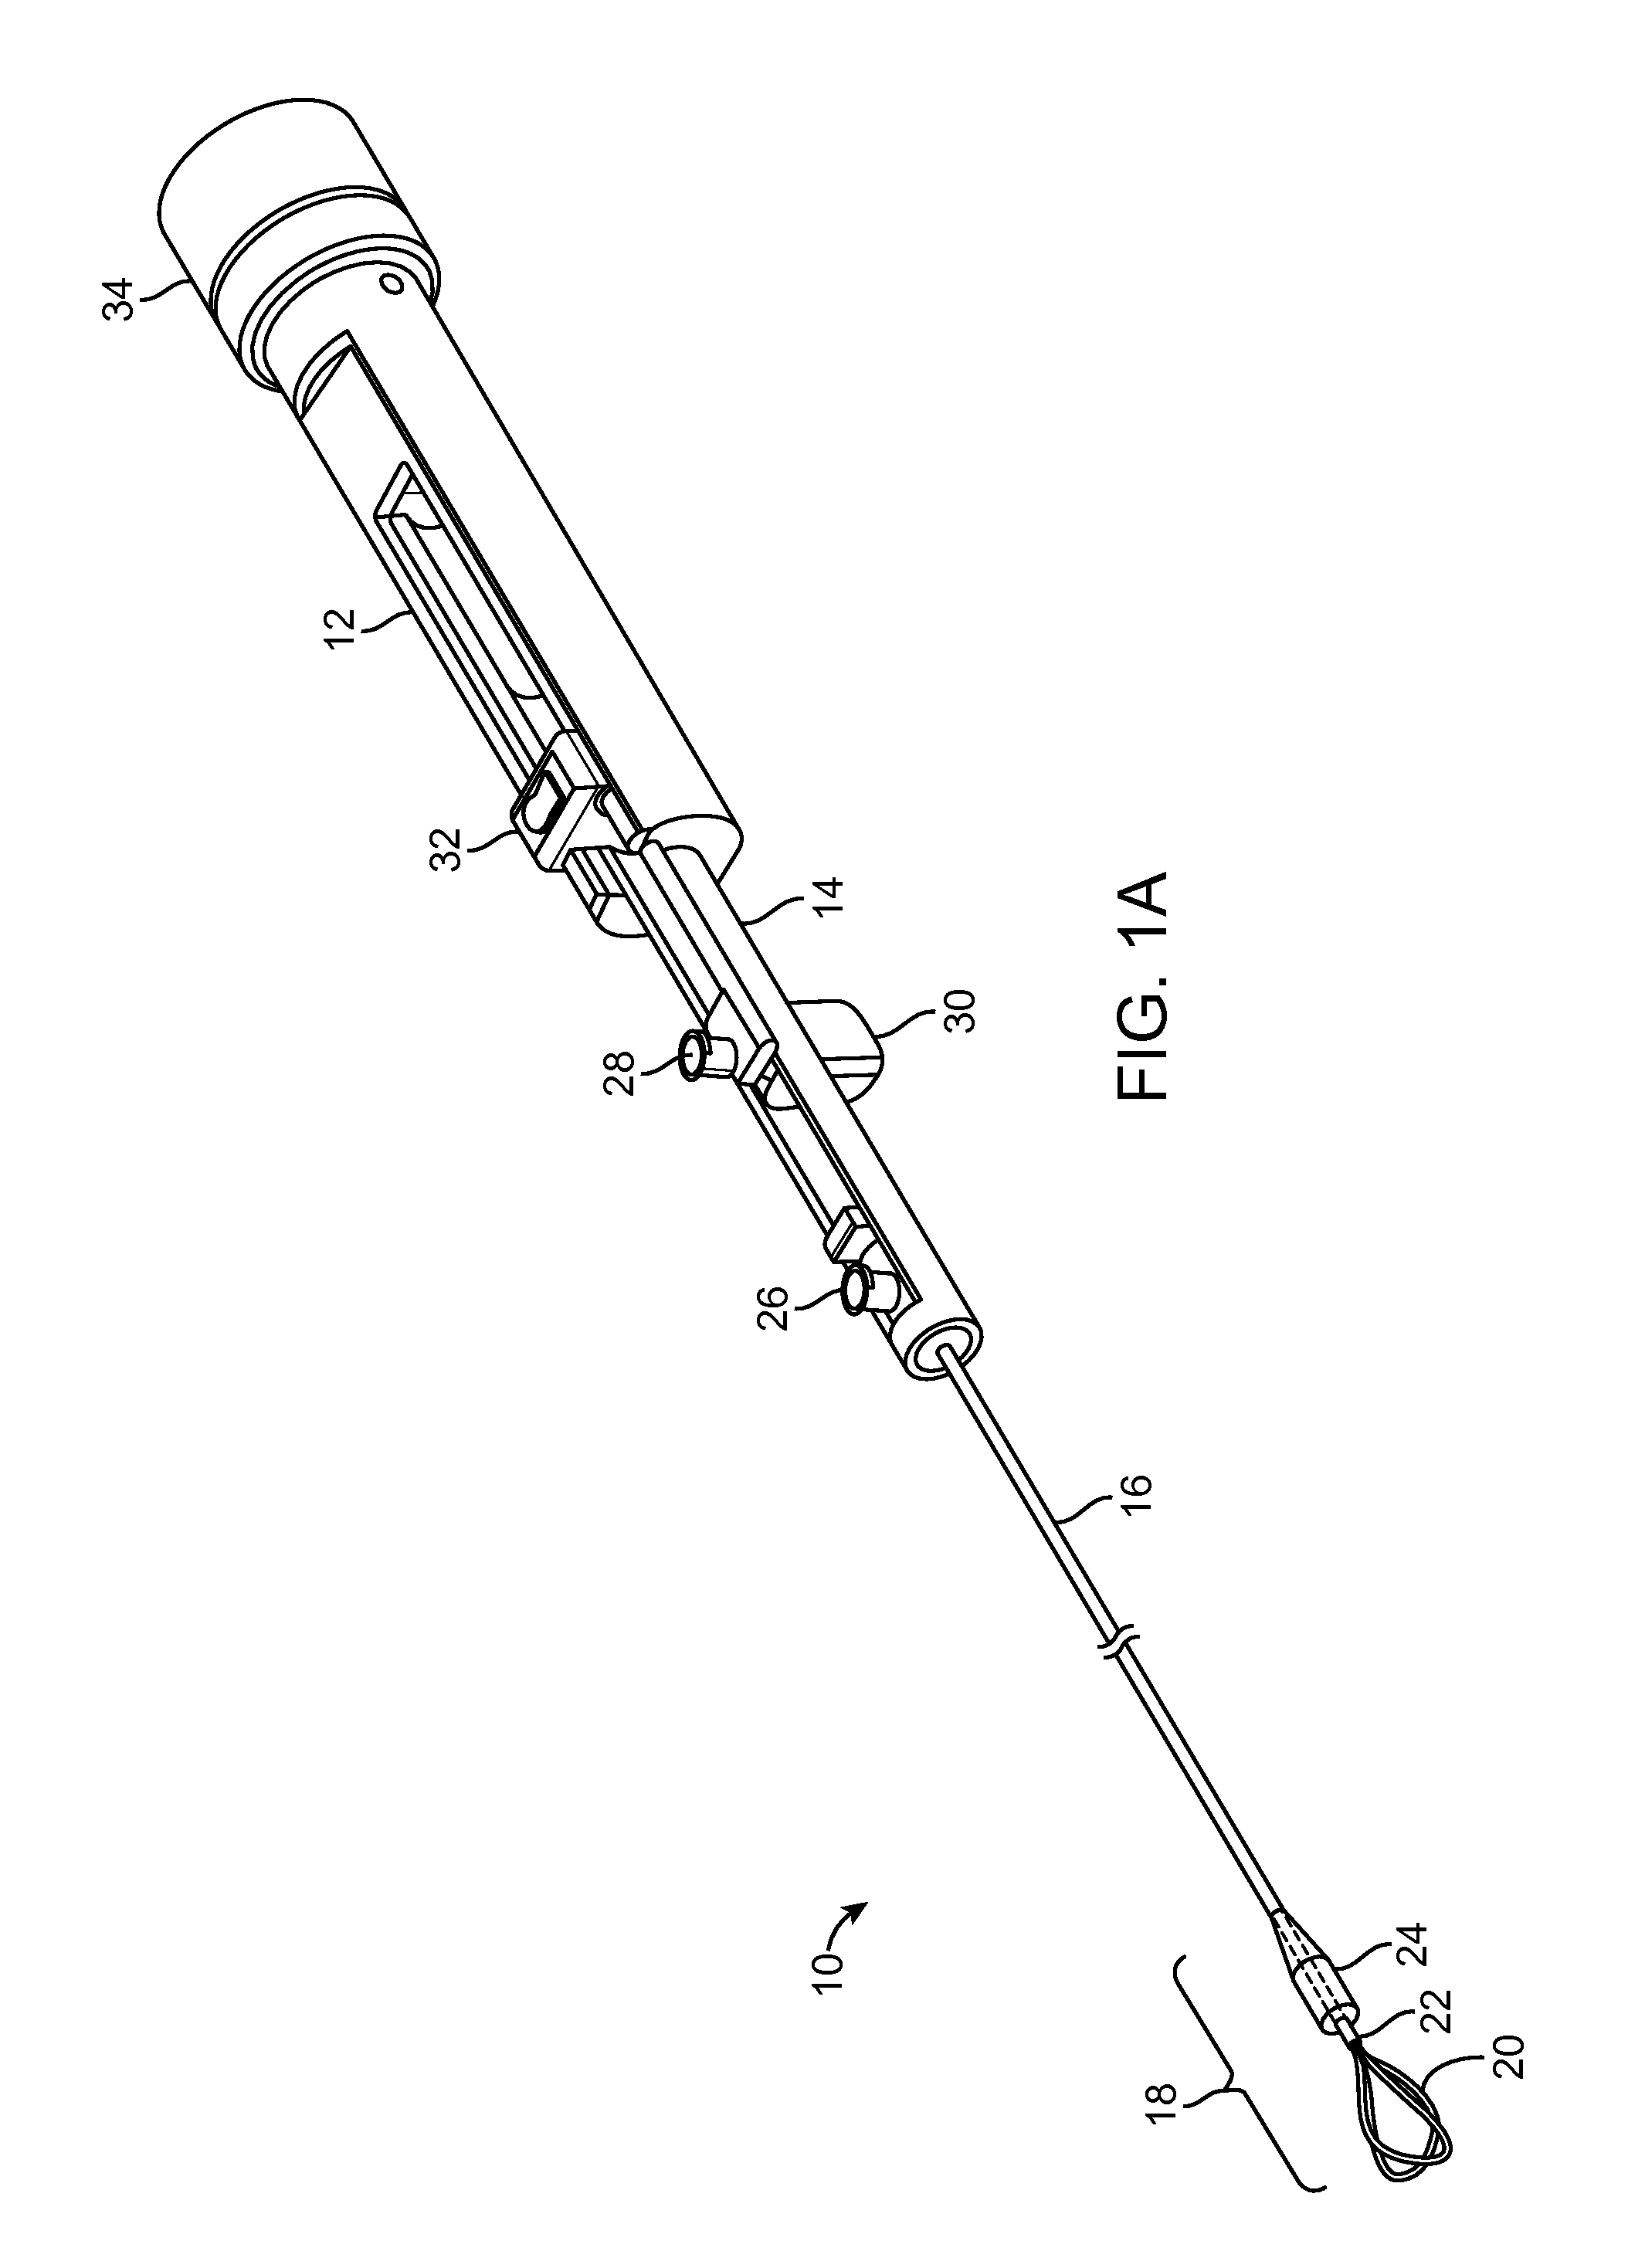 Device for removing kidney stones